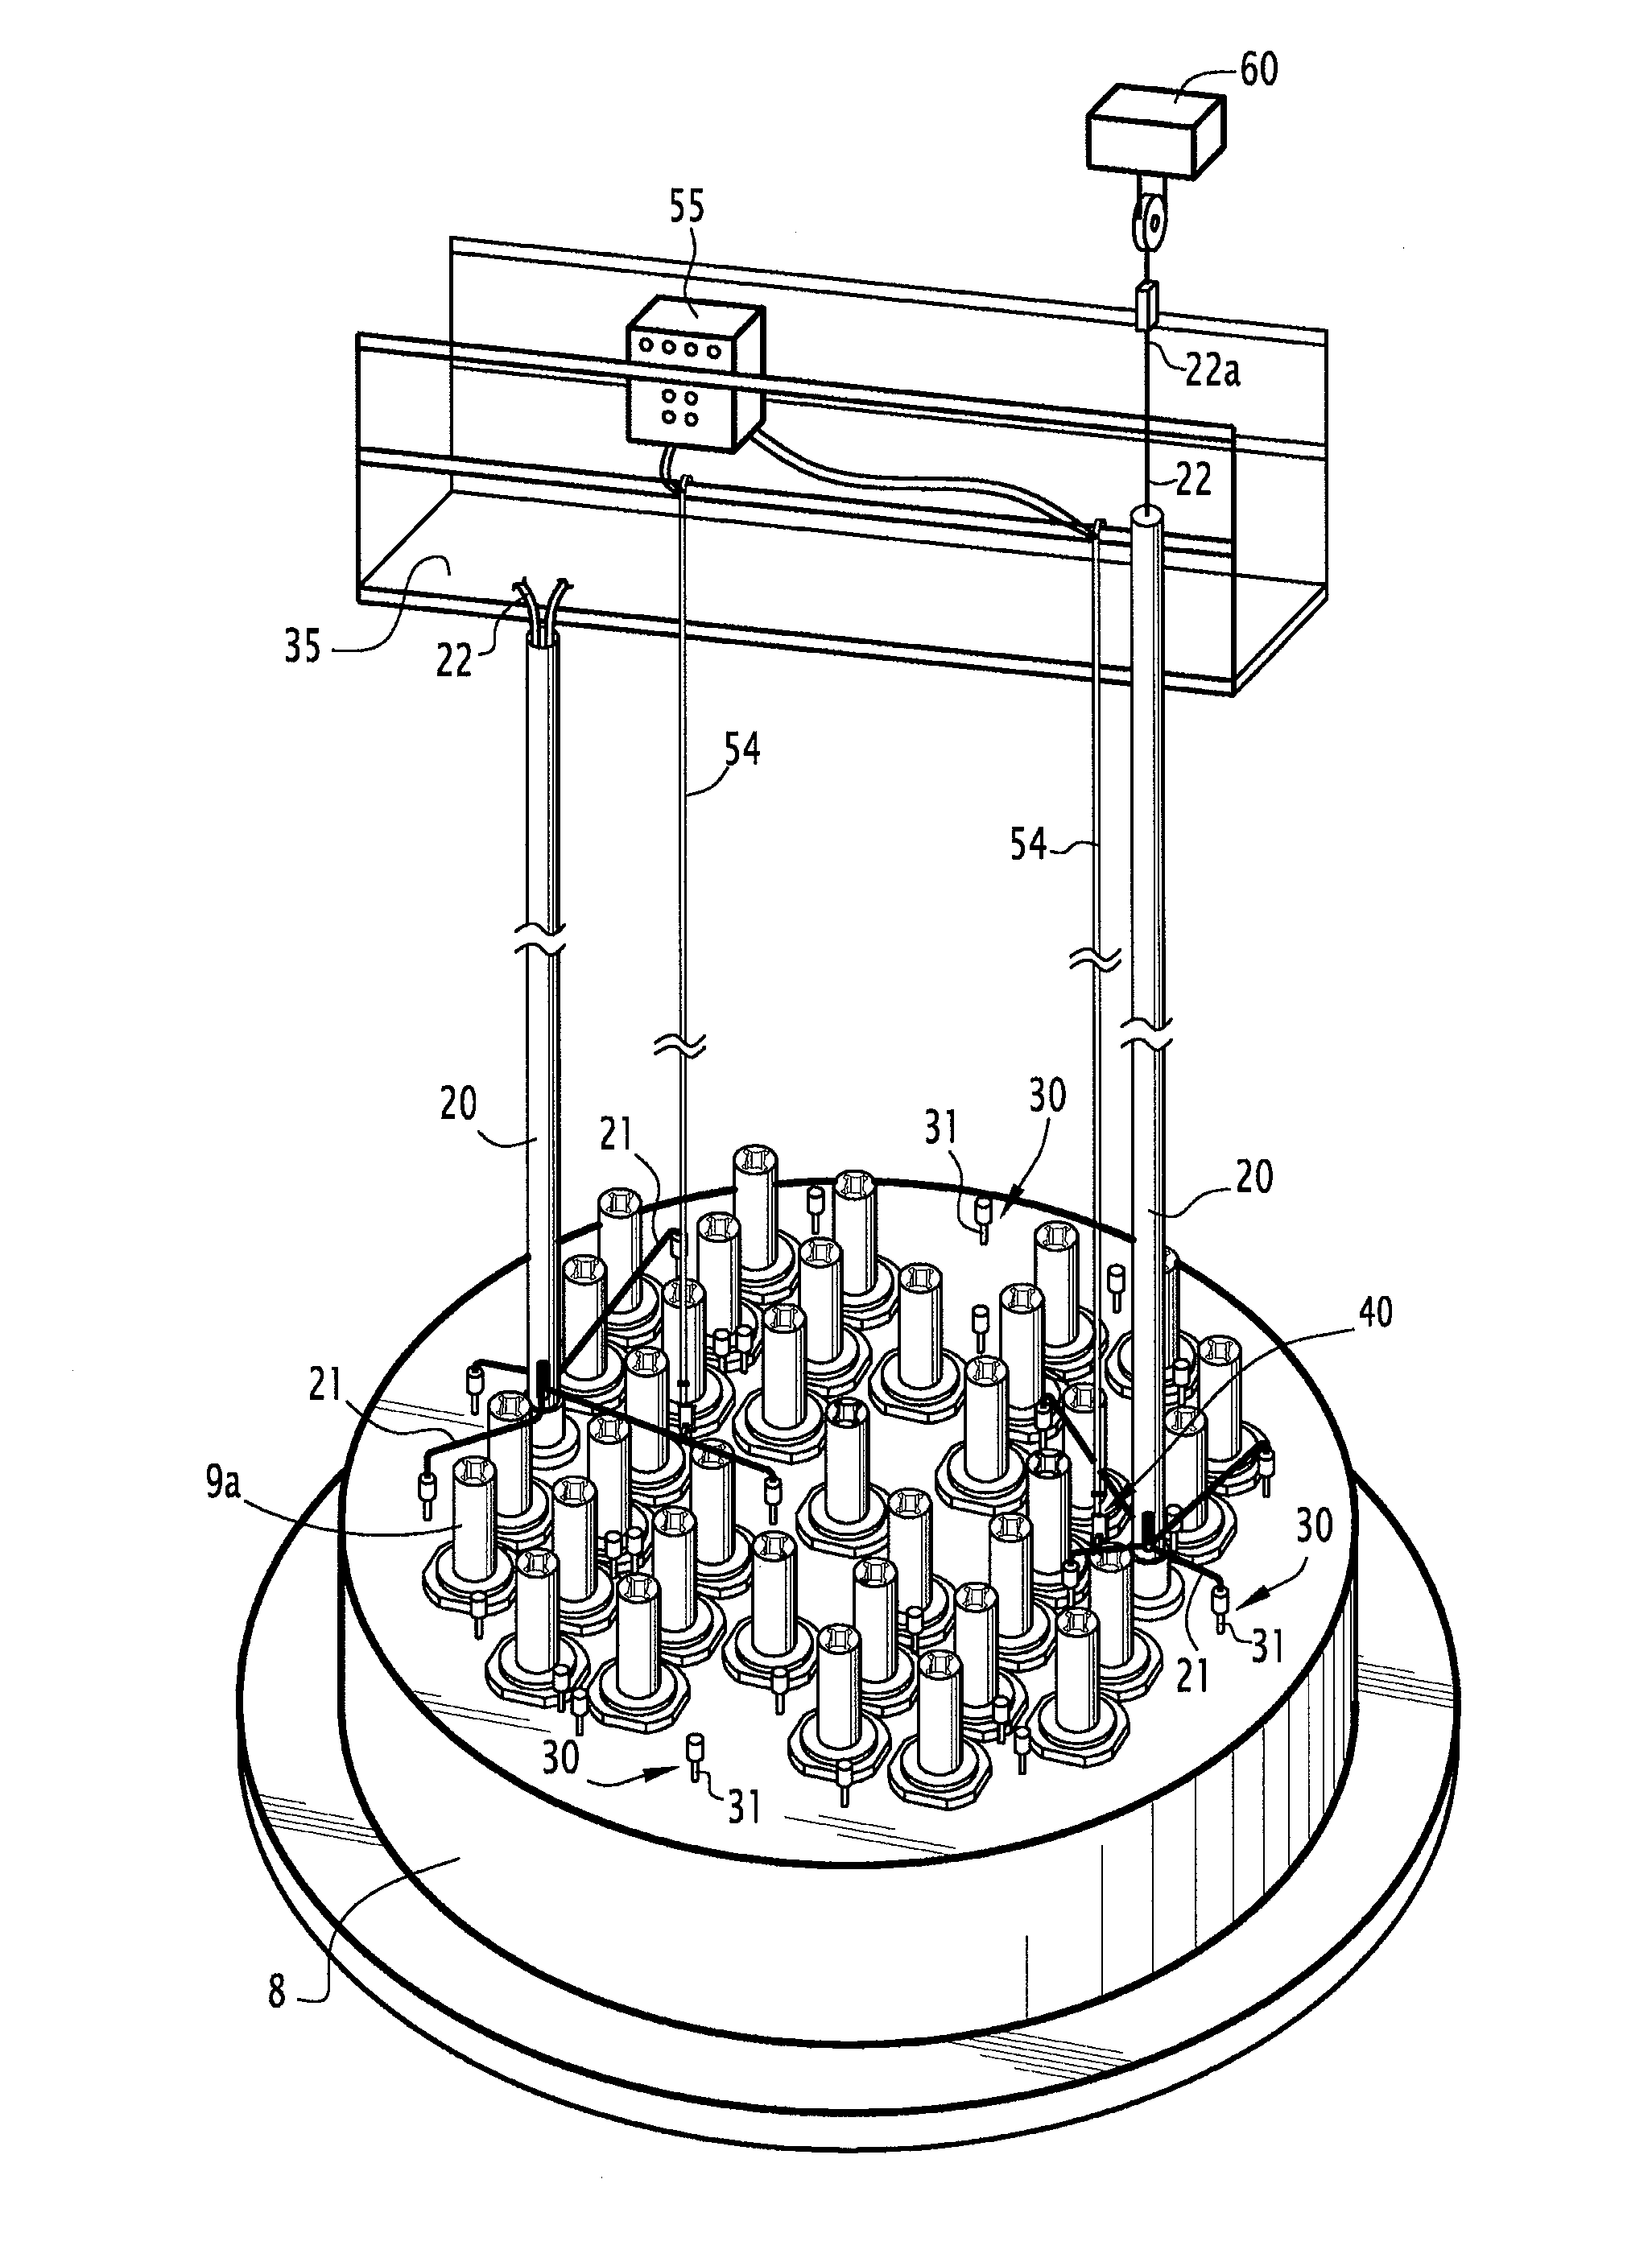 Device for assisting in the underwater extraction or insertion of an elongate element disposed in a pipe, and method for assisting in the extraction or insertion of one such element